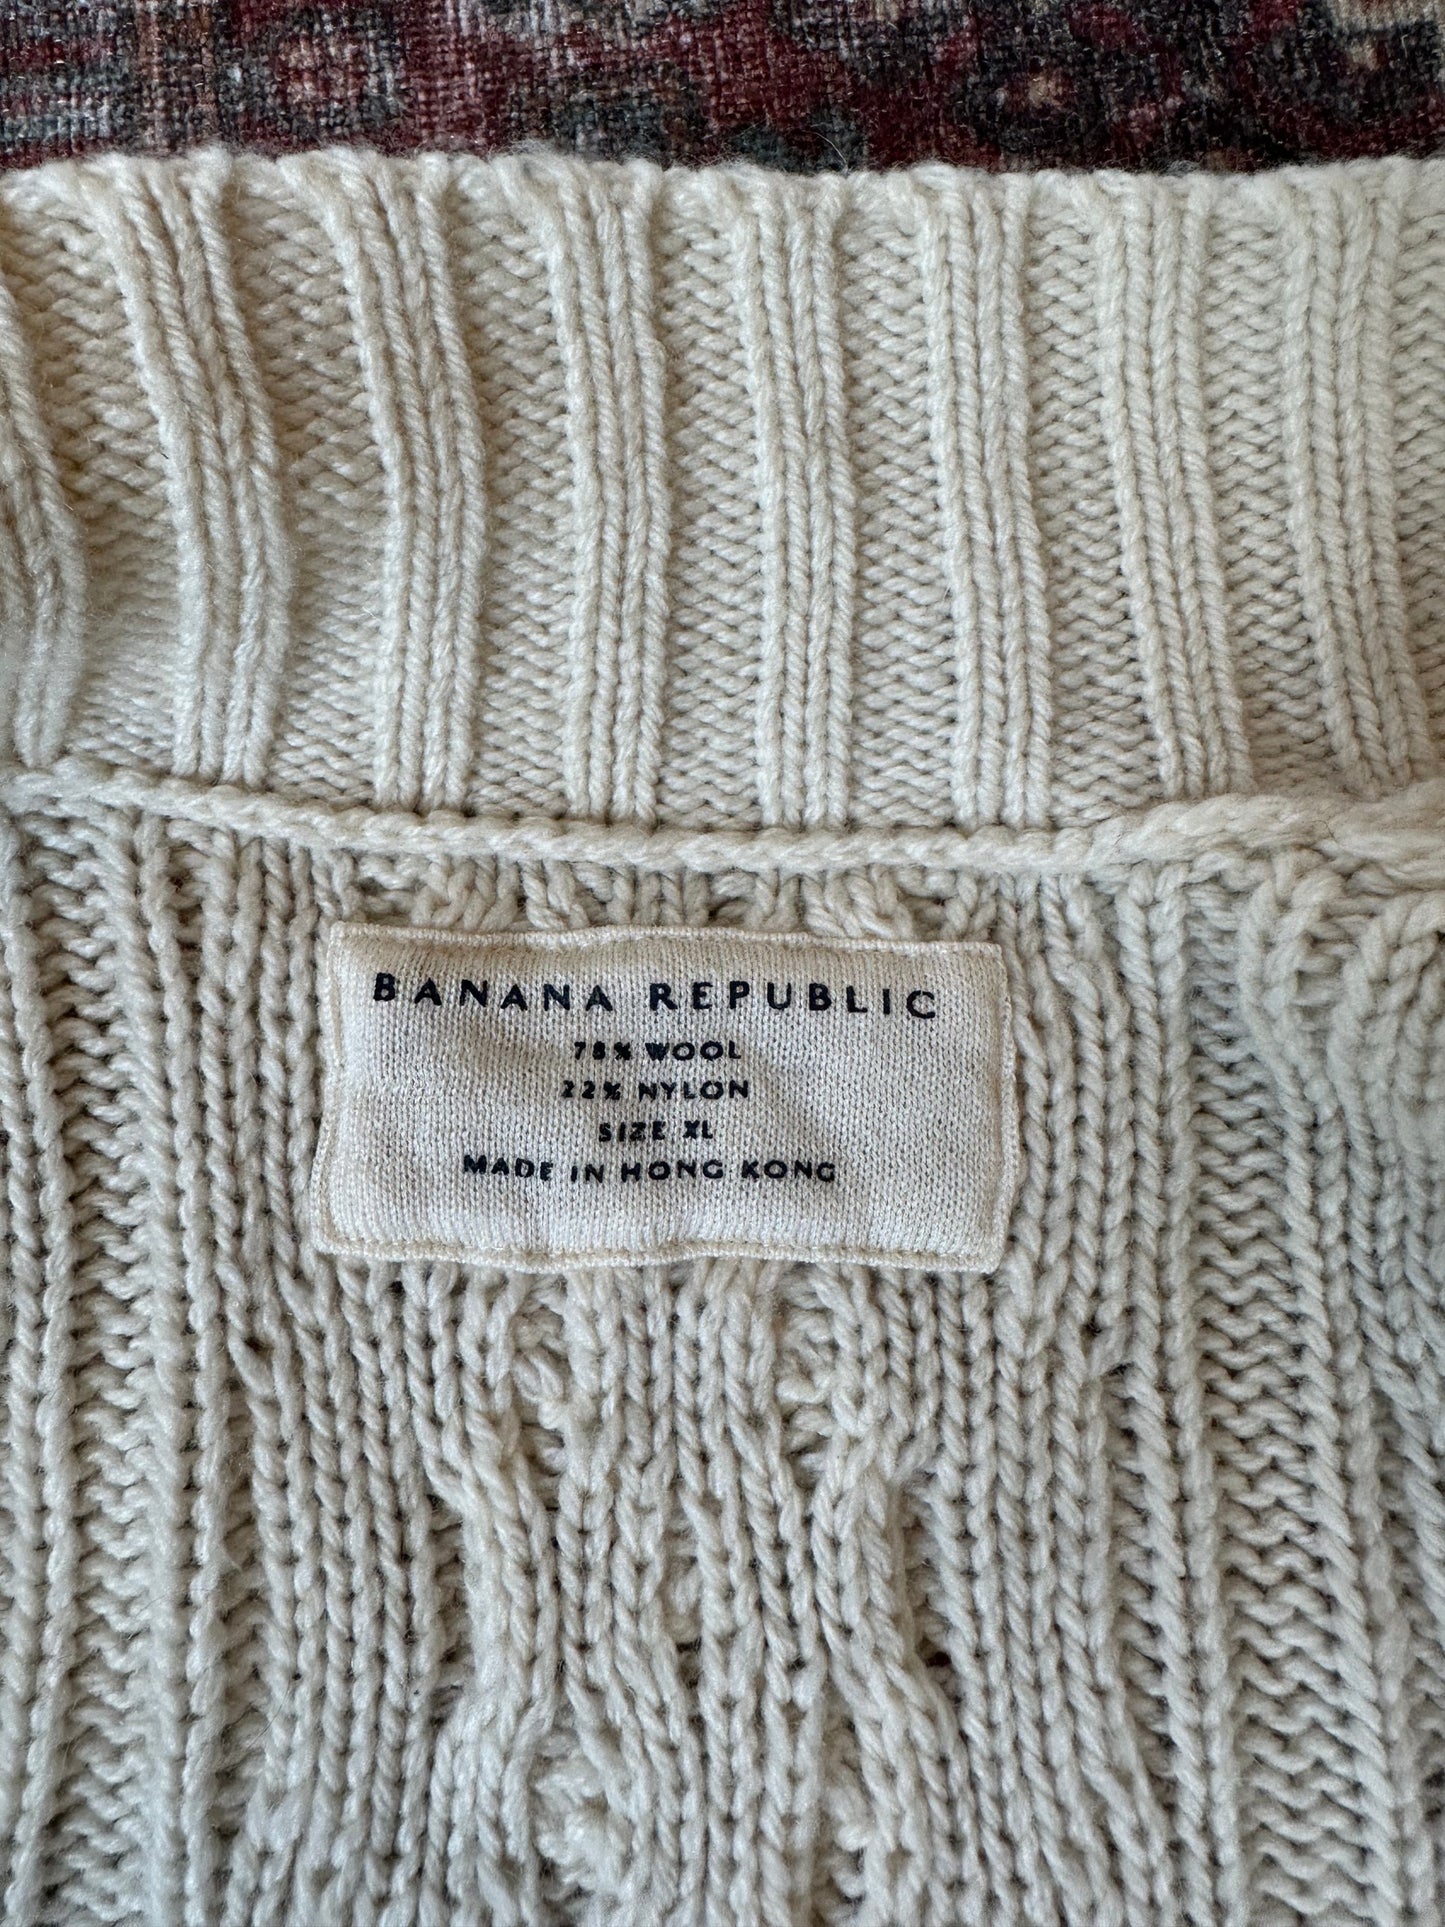 Banana Republic Wool Cable Knit Sweater